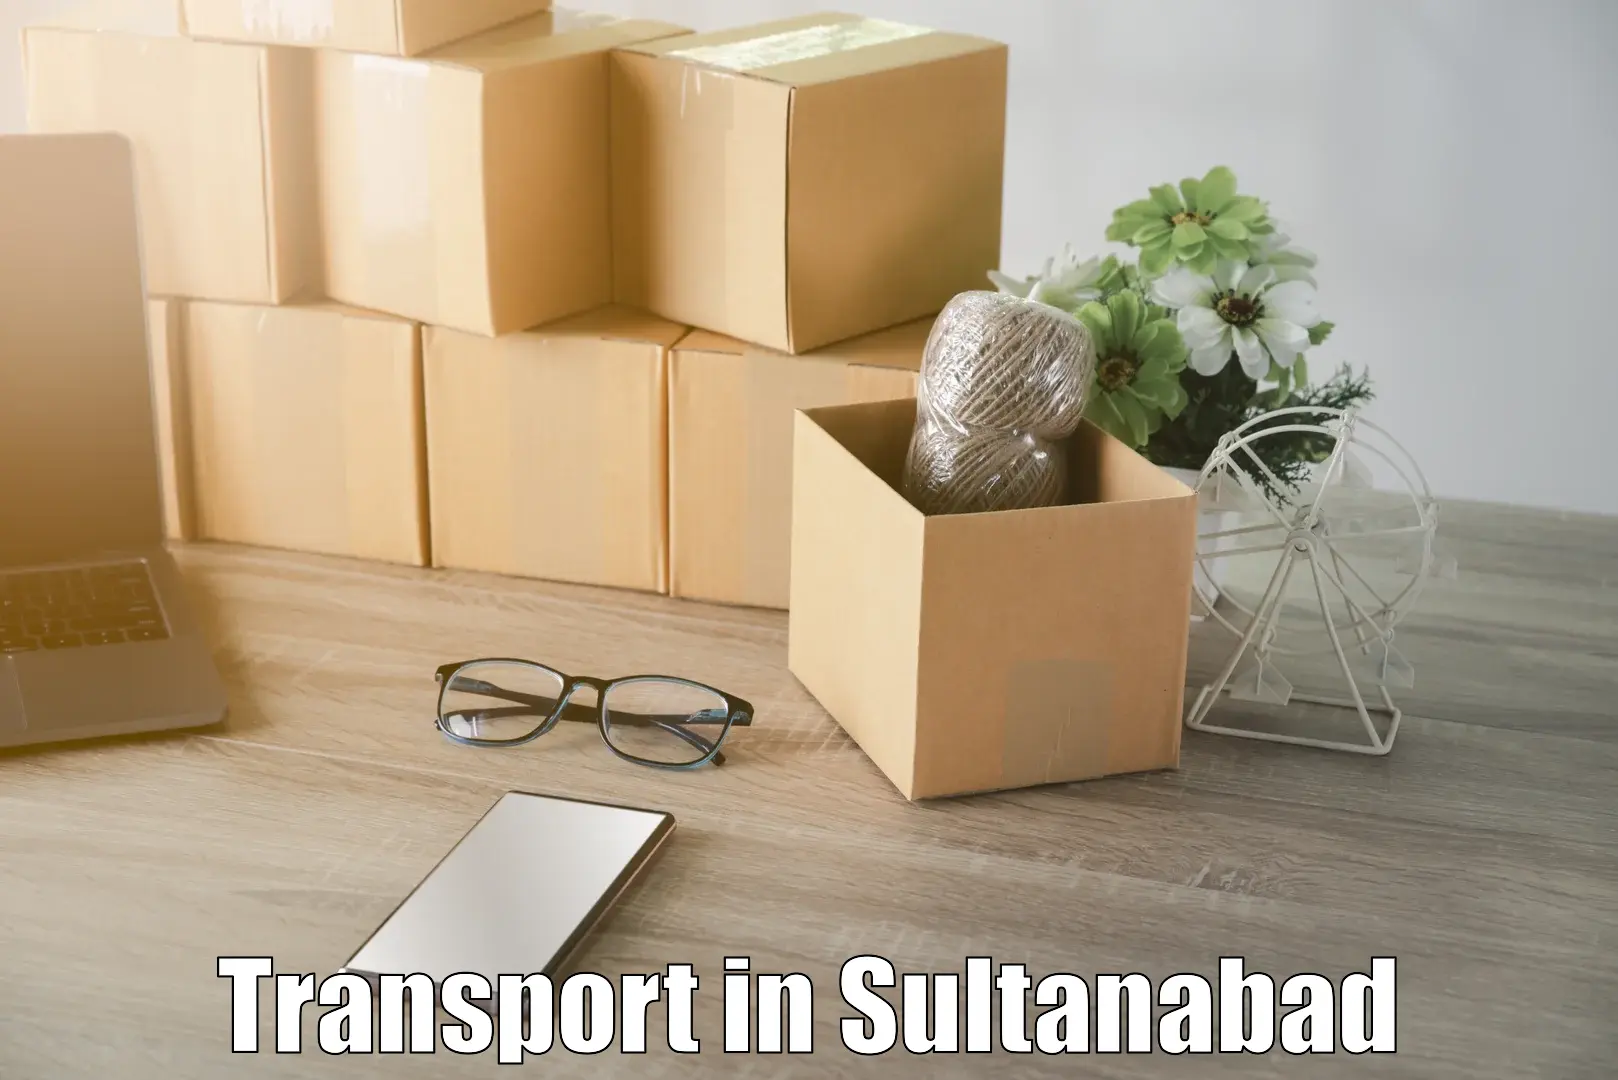 Road transport online services in Sultanabad